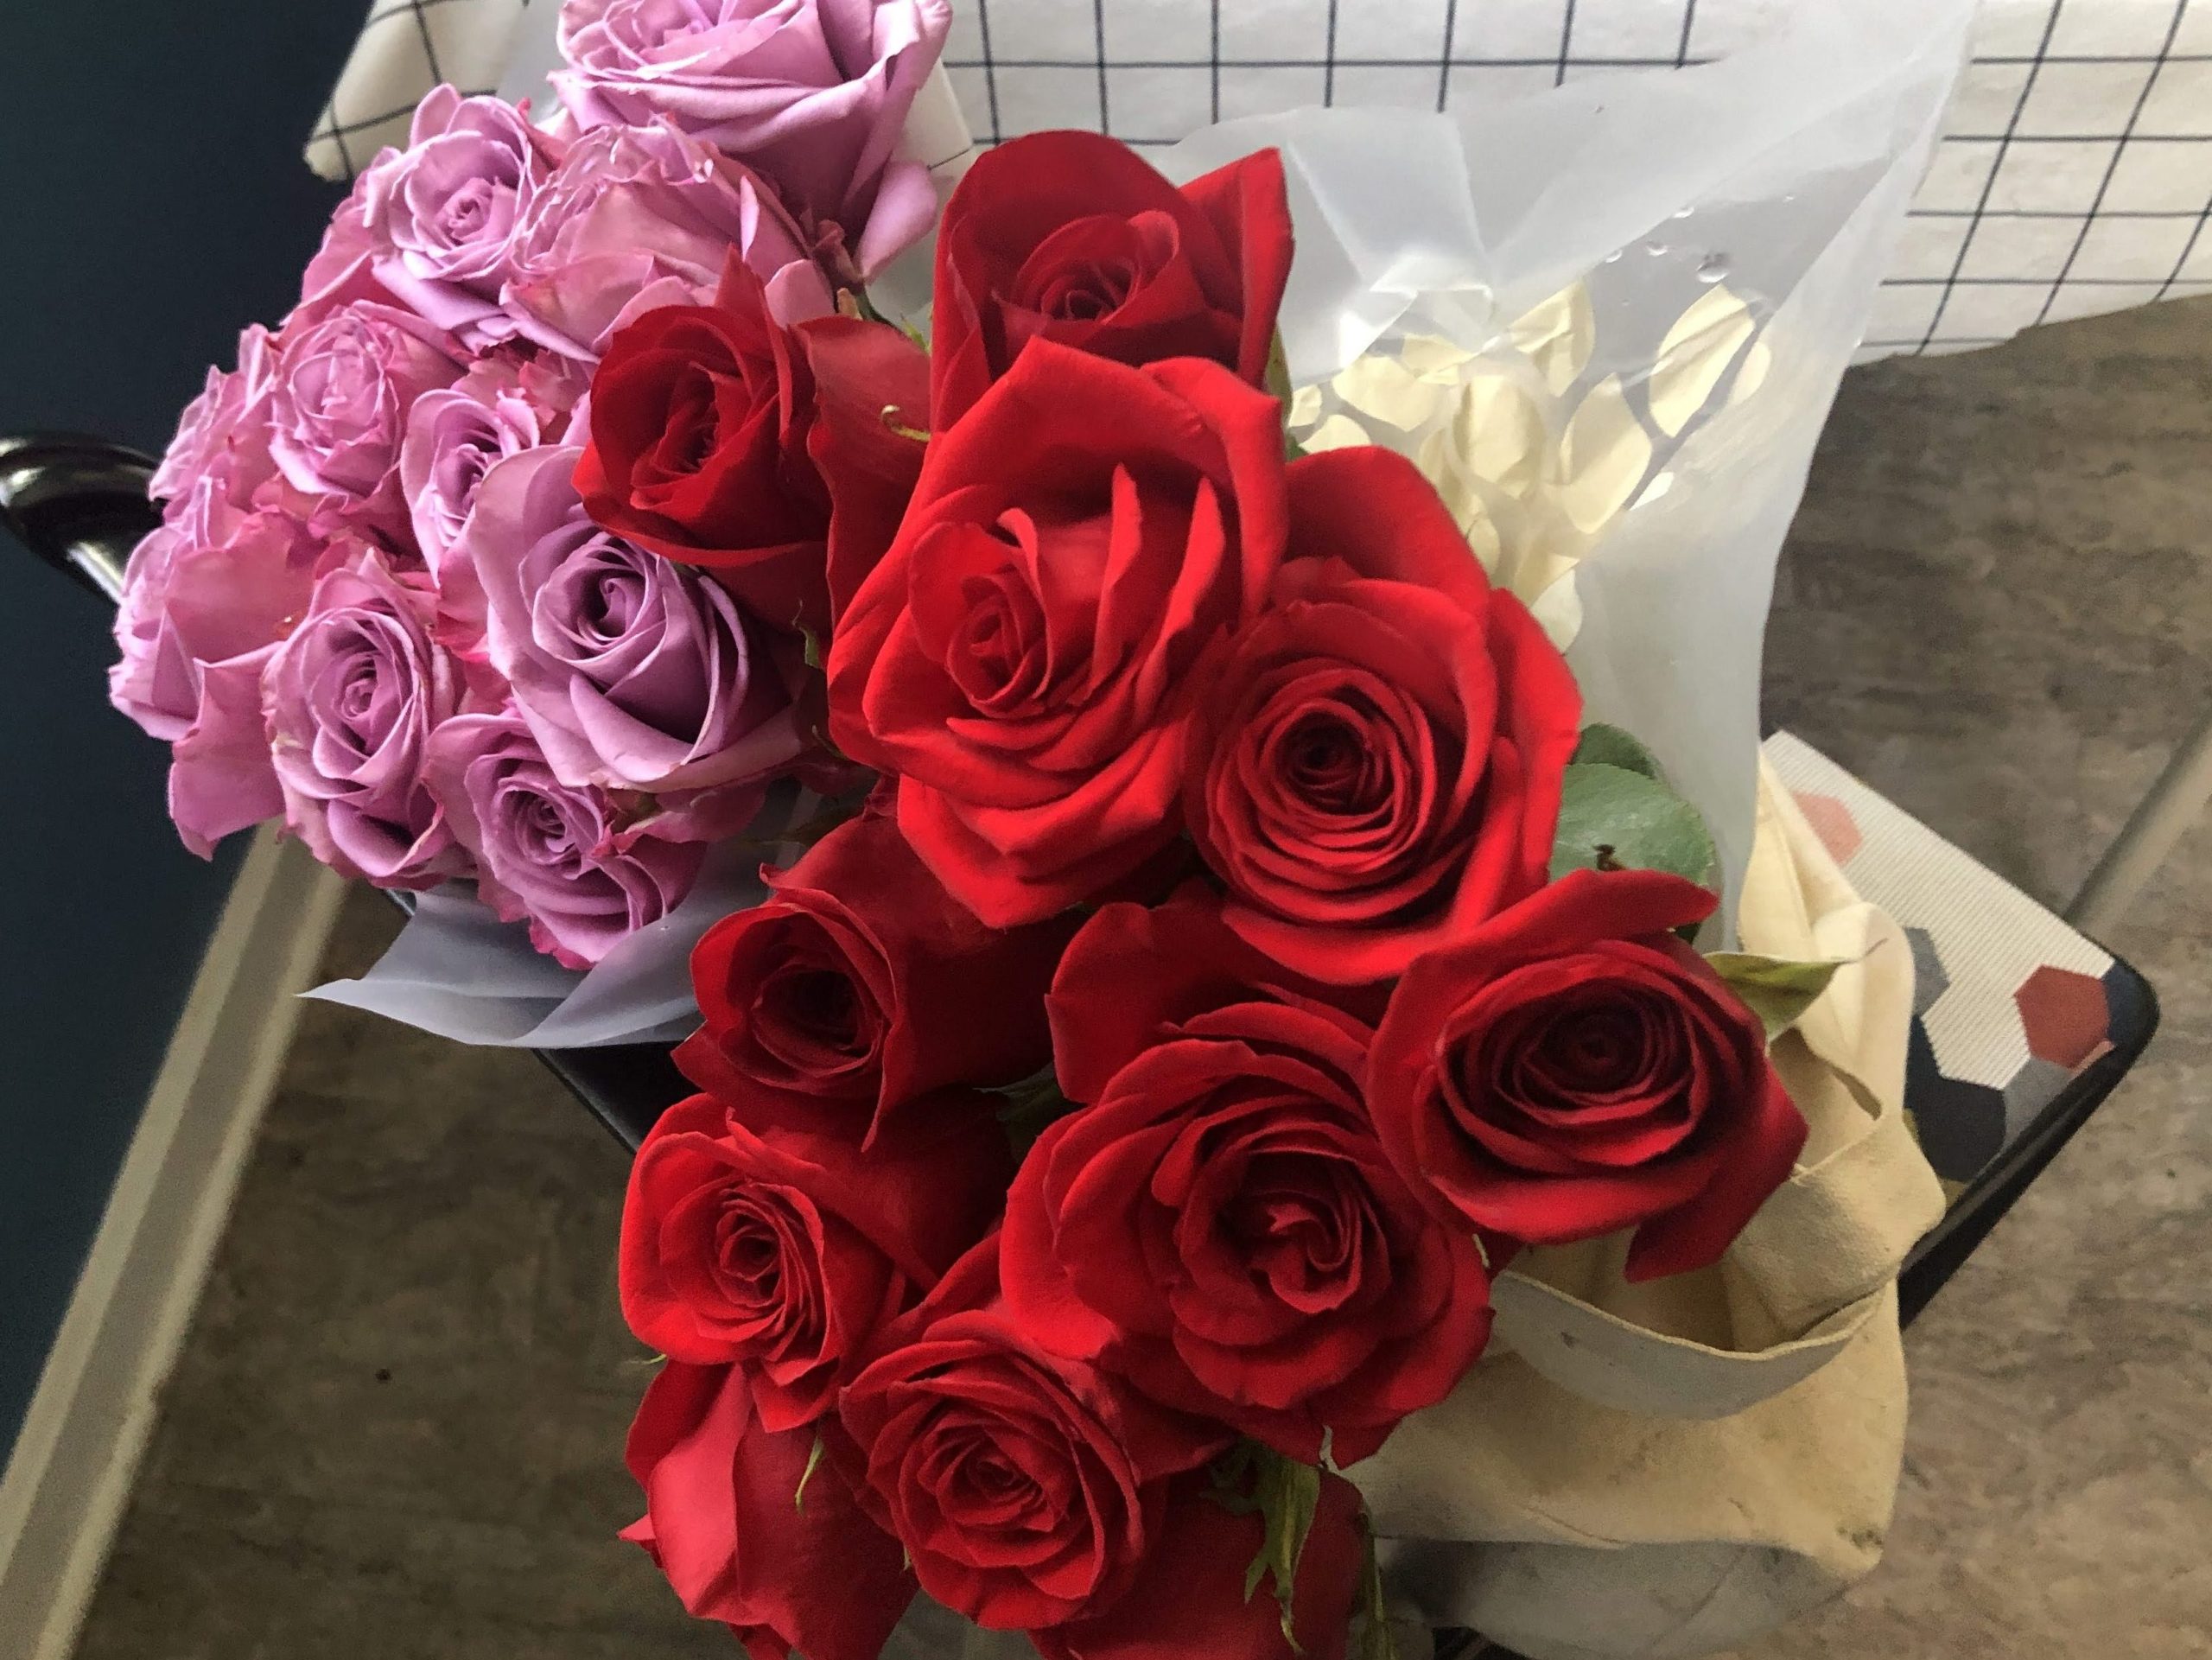 A bouquet of pink roses and a bouquet of red roses.